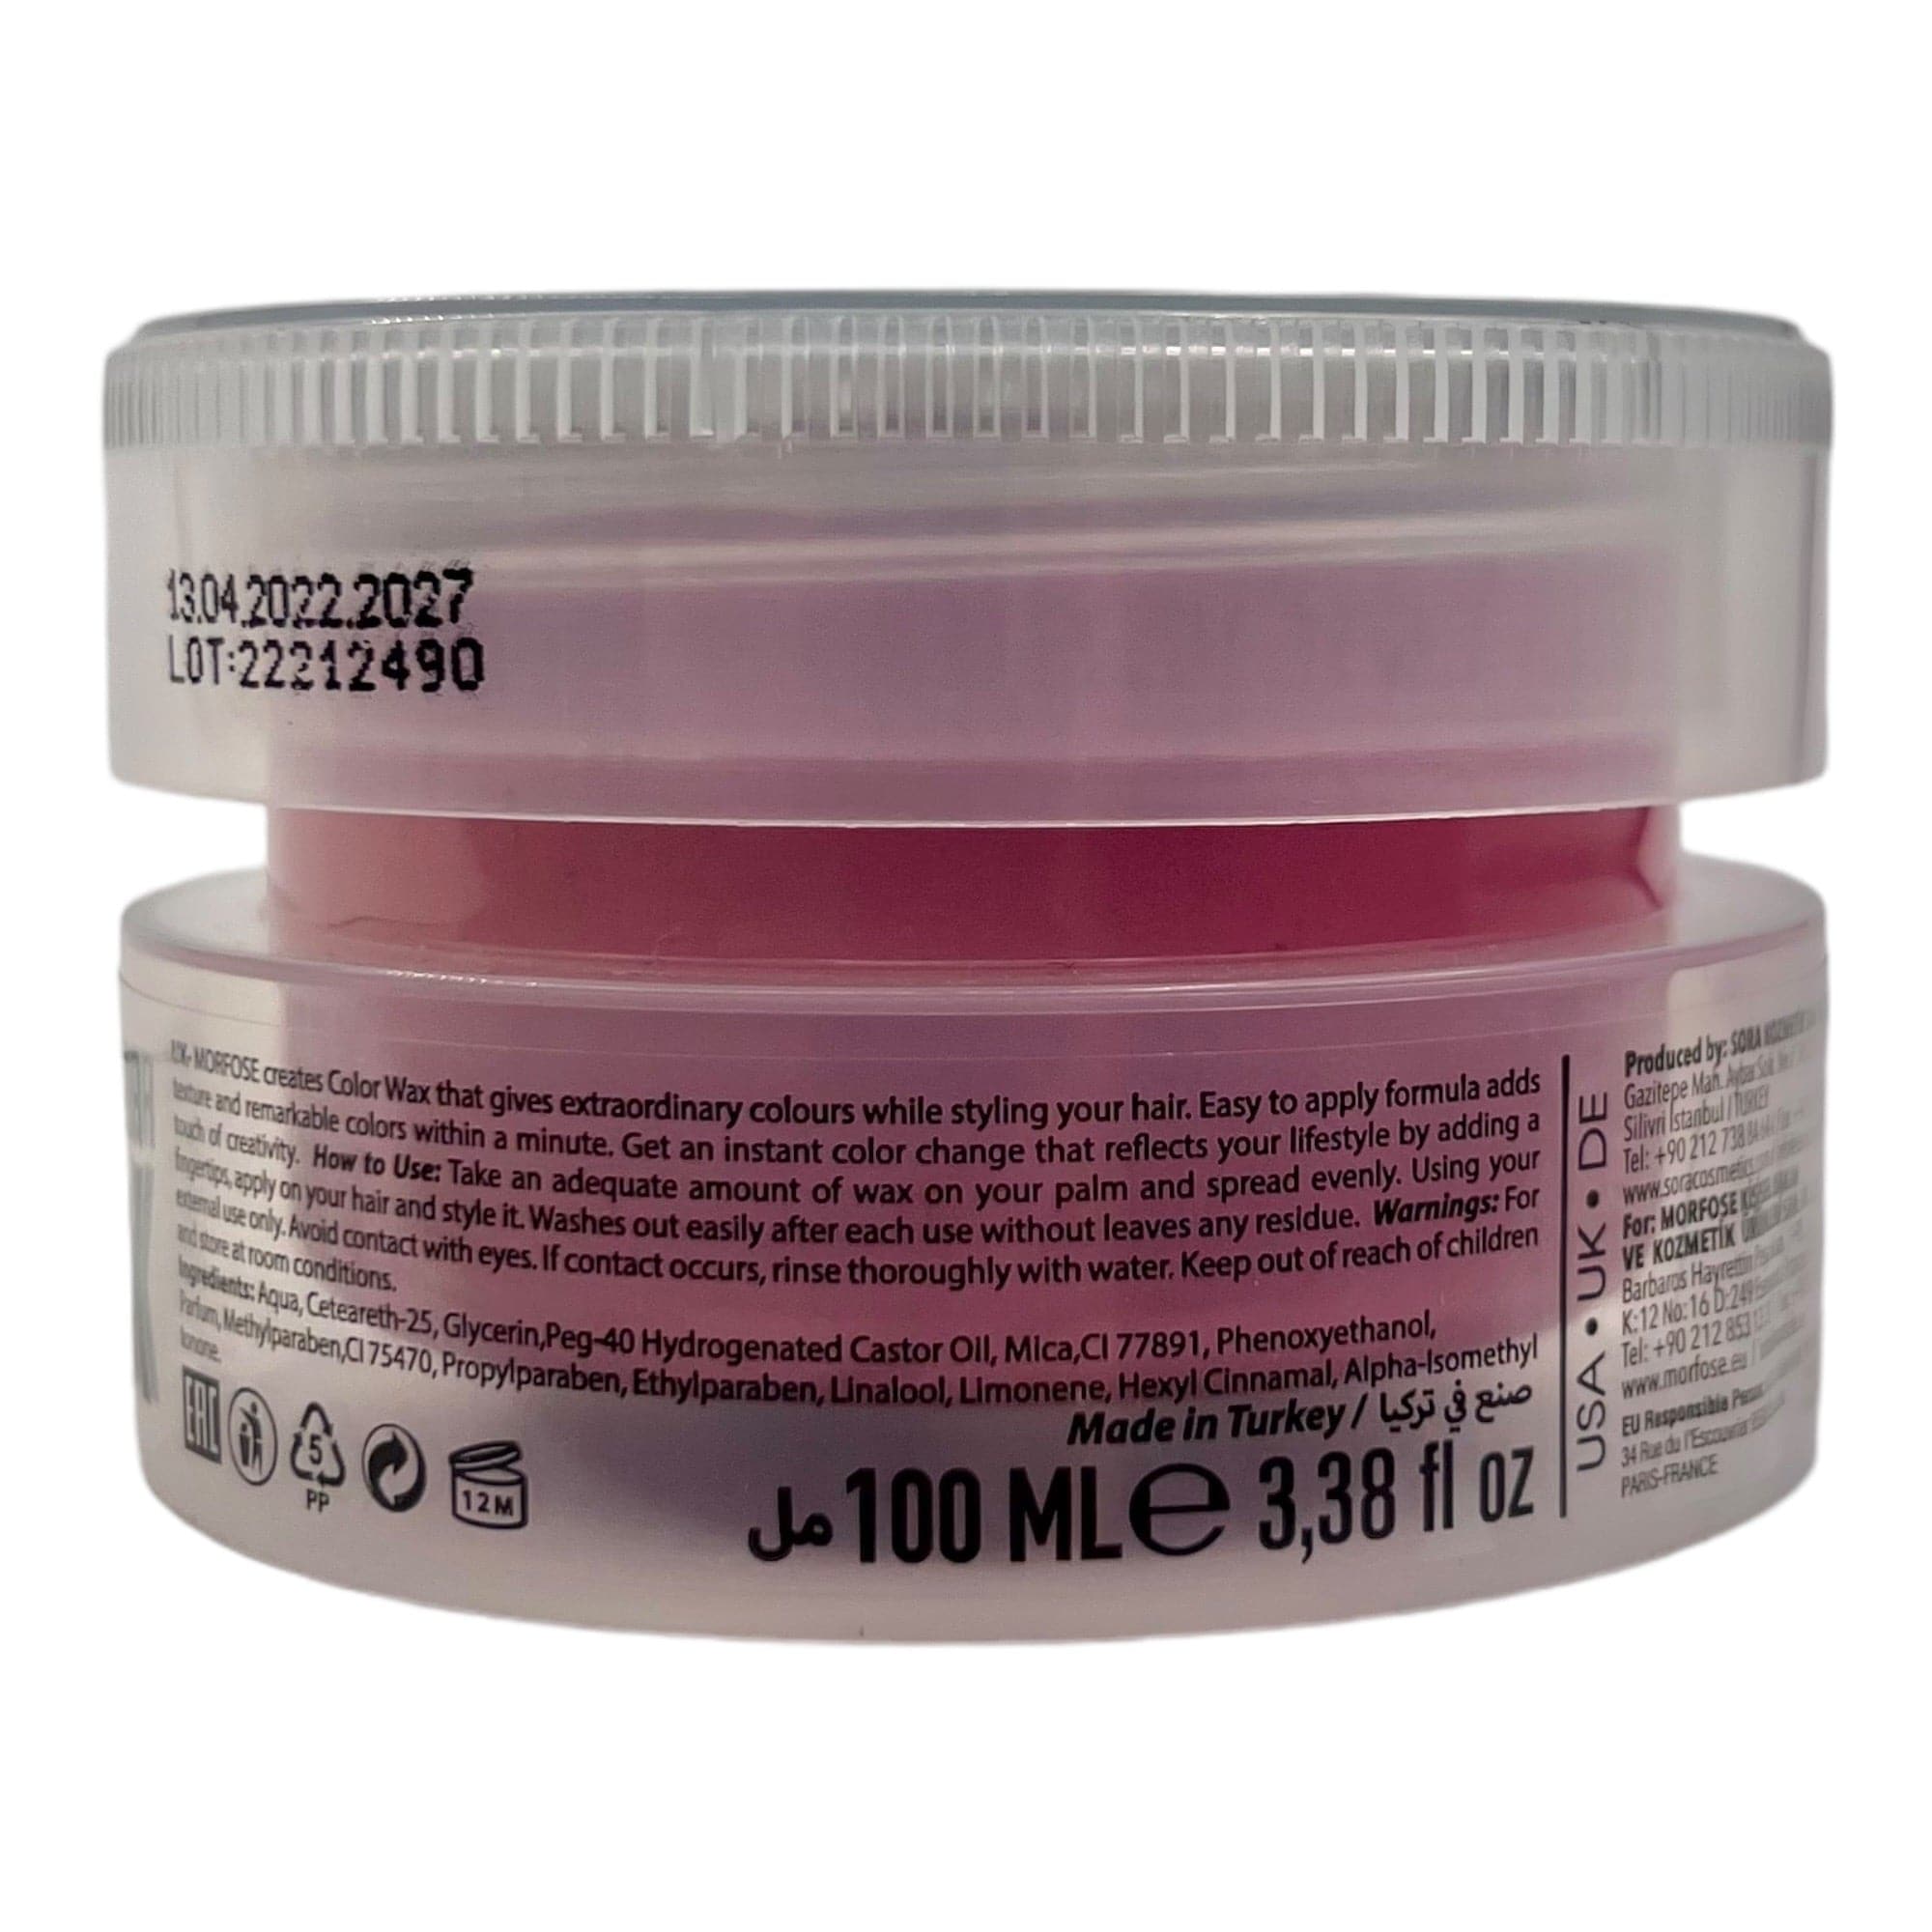 Morfose - Hair Colour Wax Pink Styling 100ml